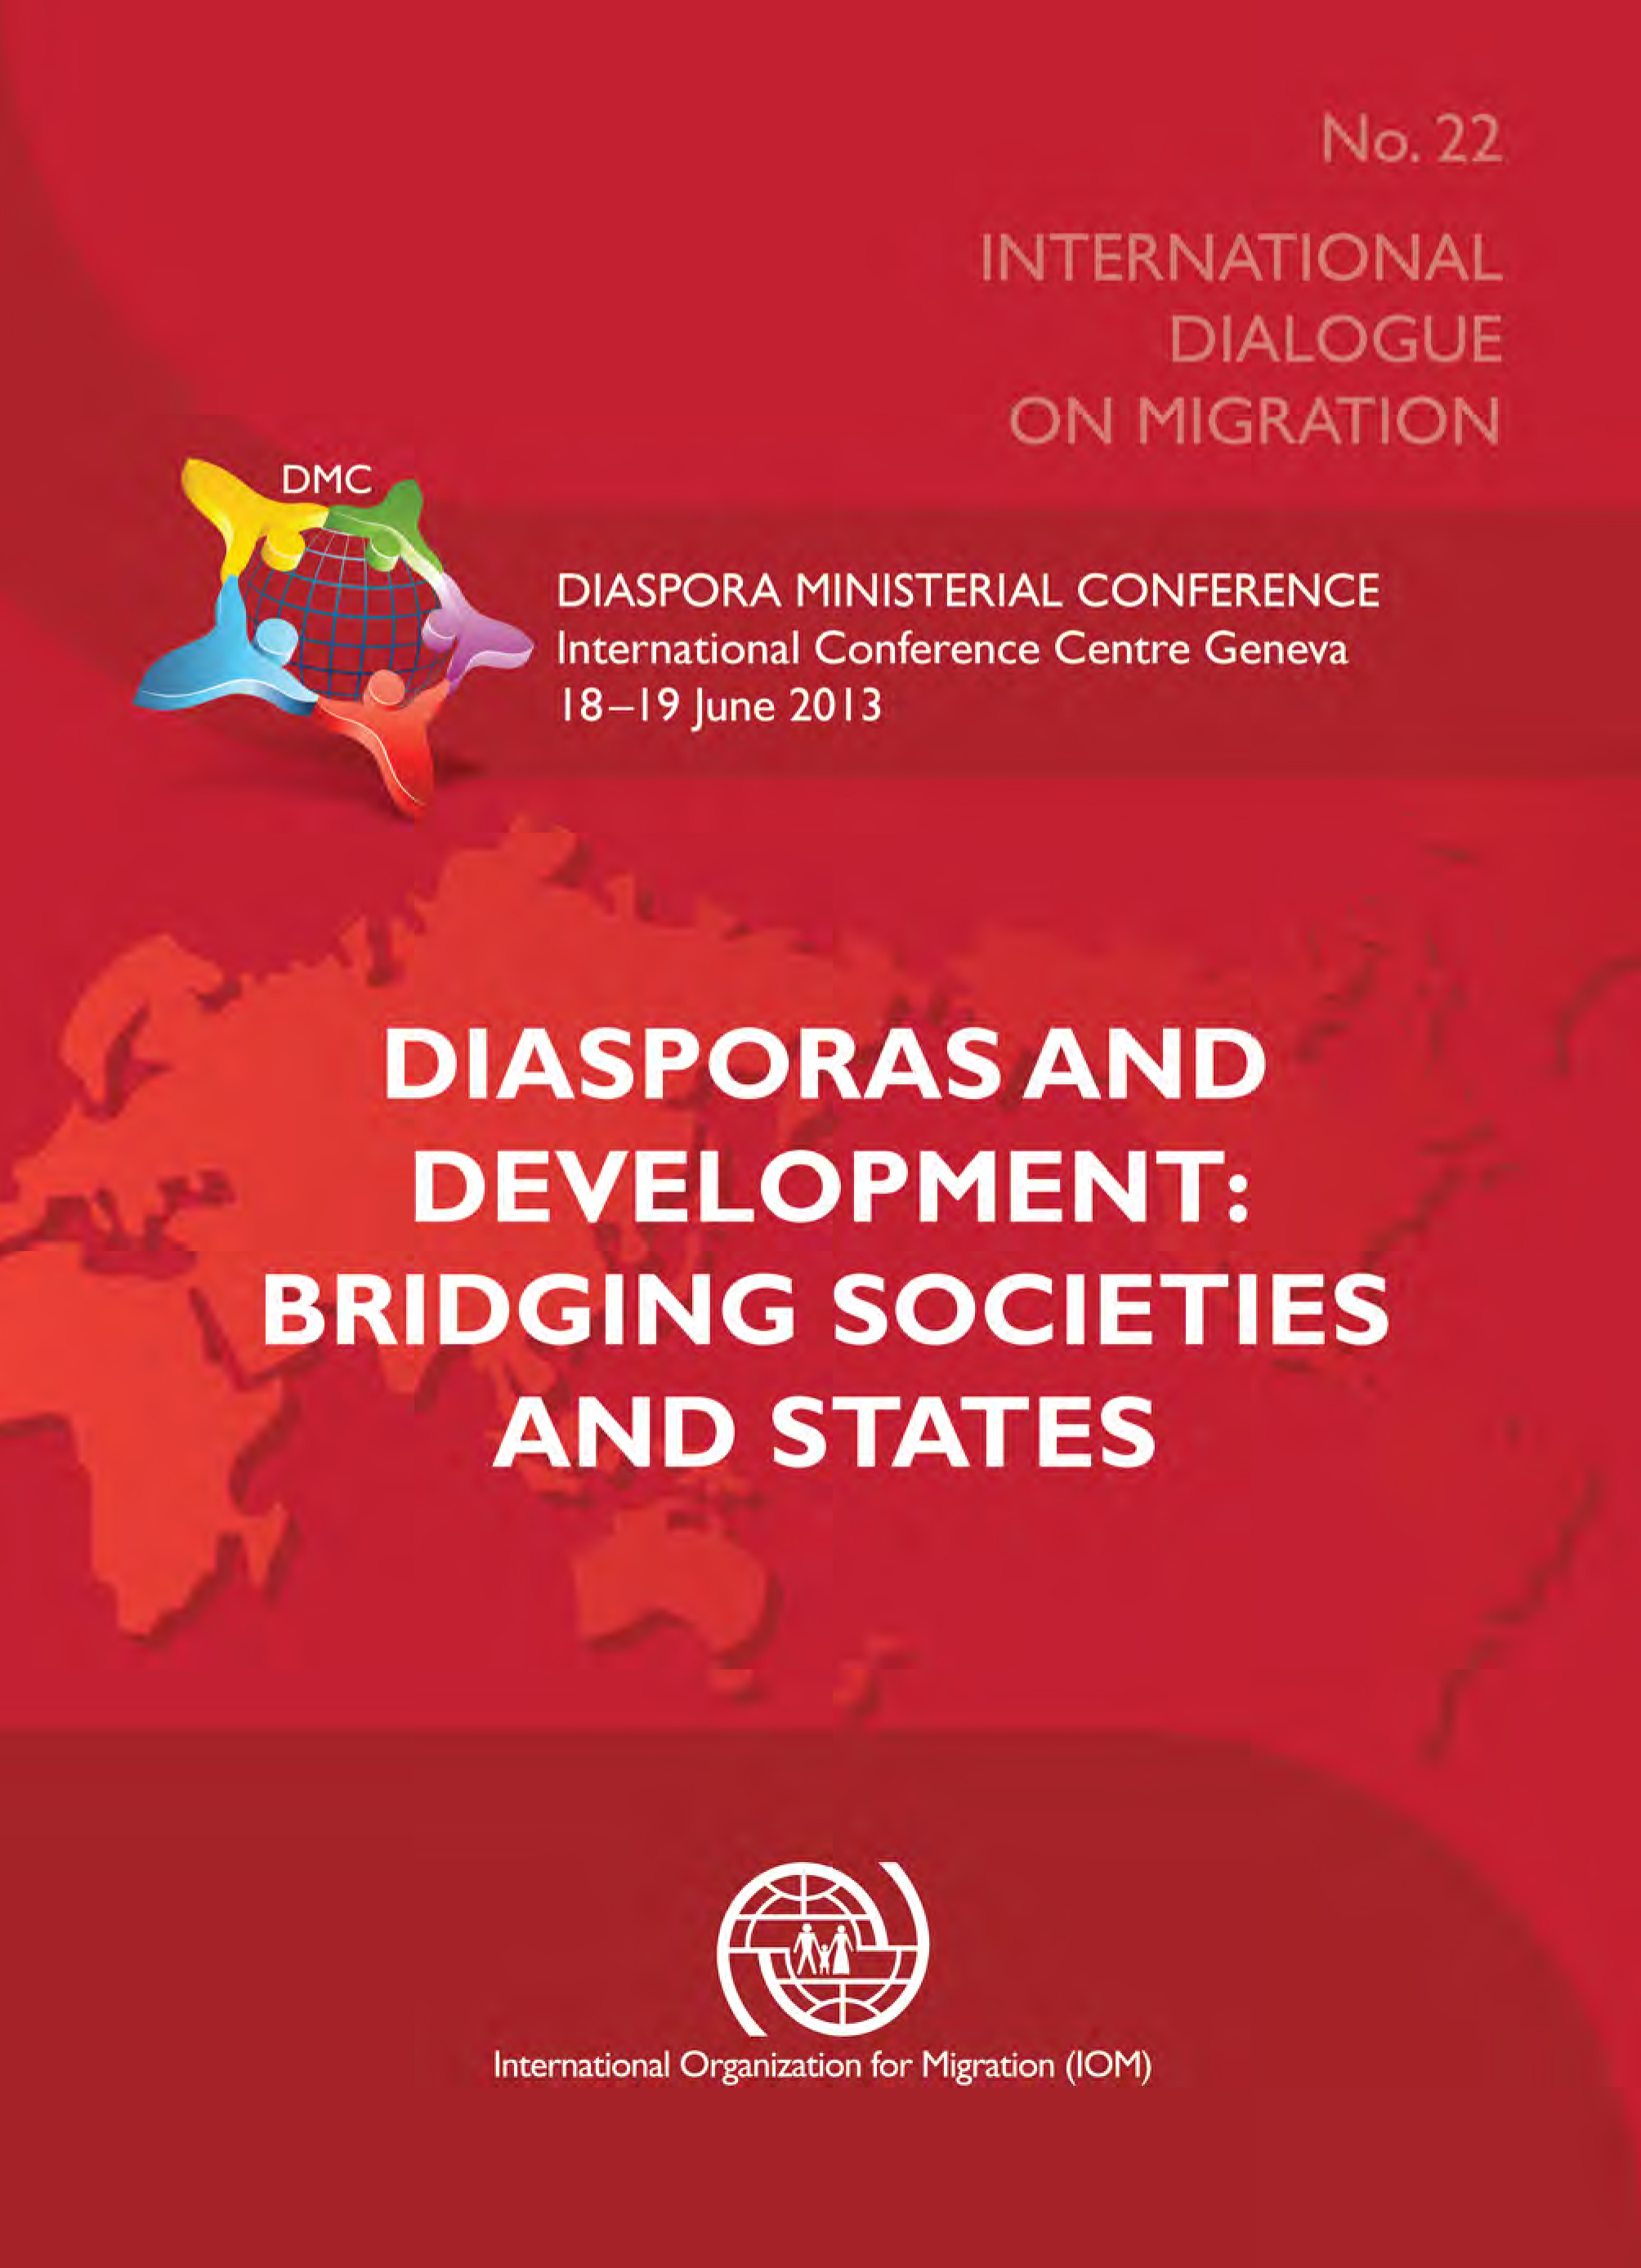 image of Strategic partnerships between states, international organizations, civil society and the private sector provide a framework to engage diasporas